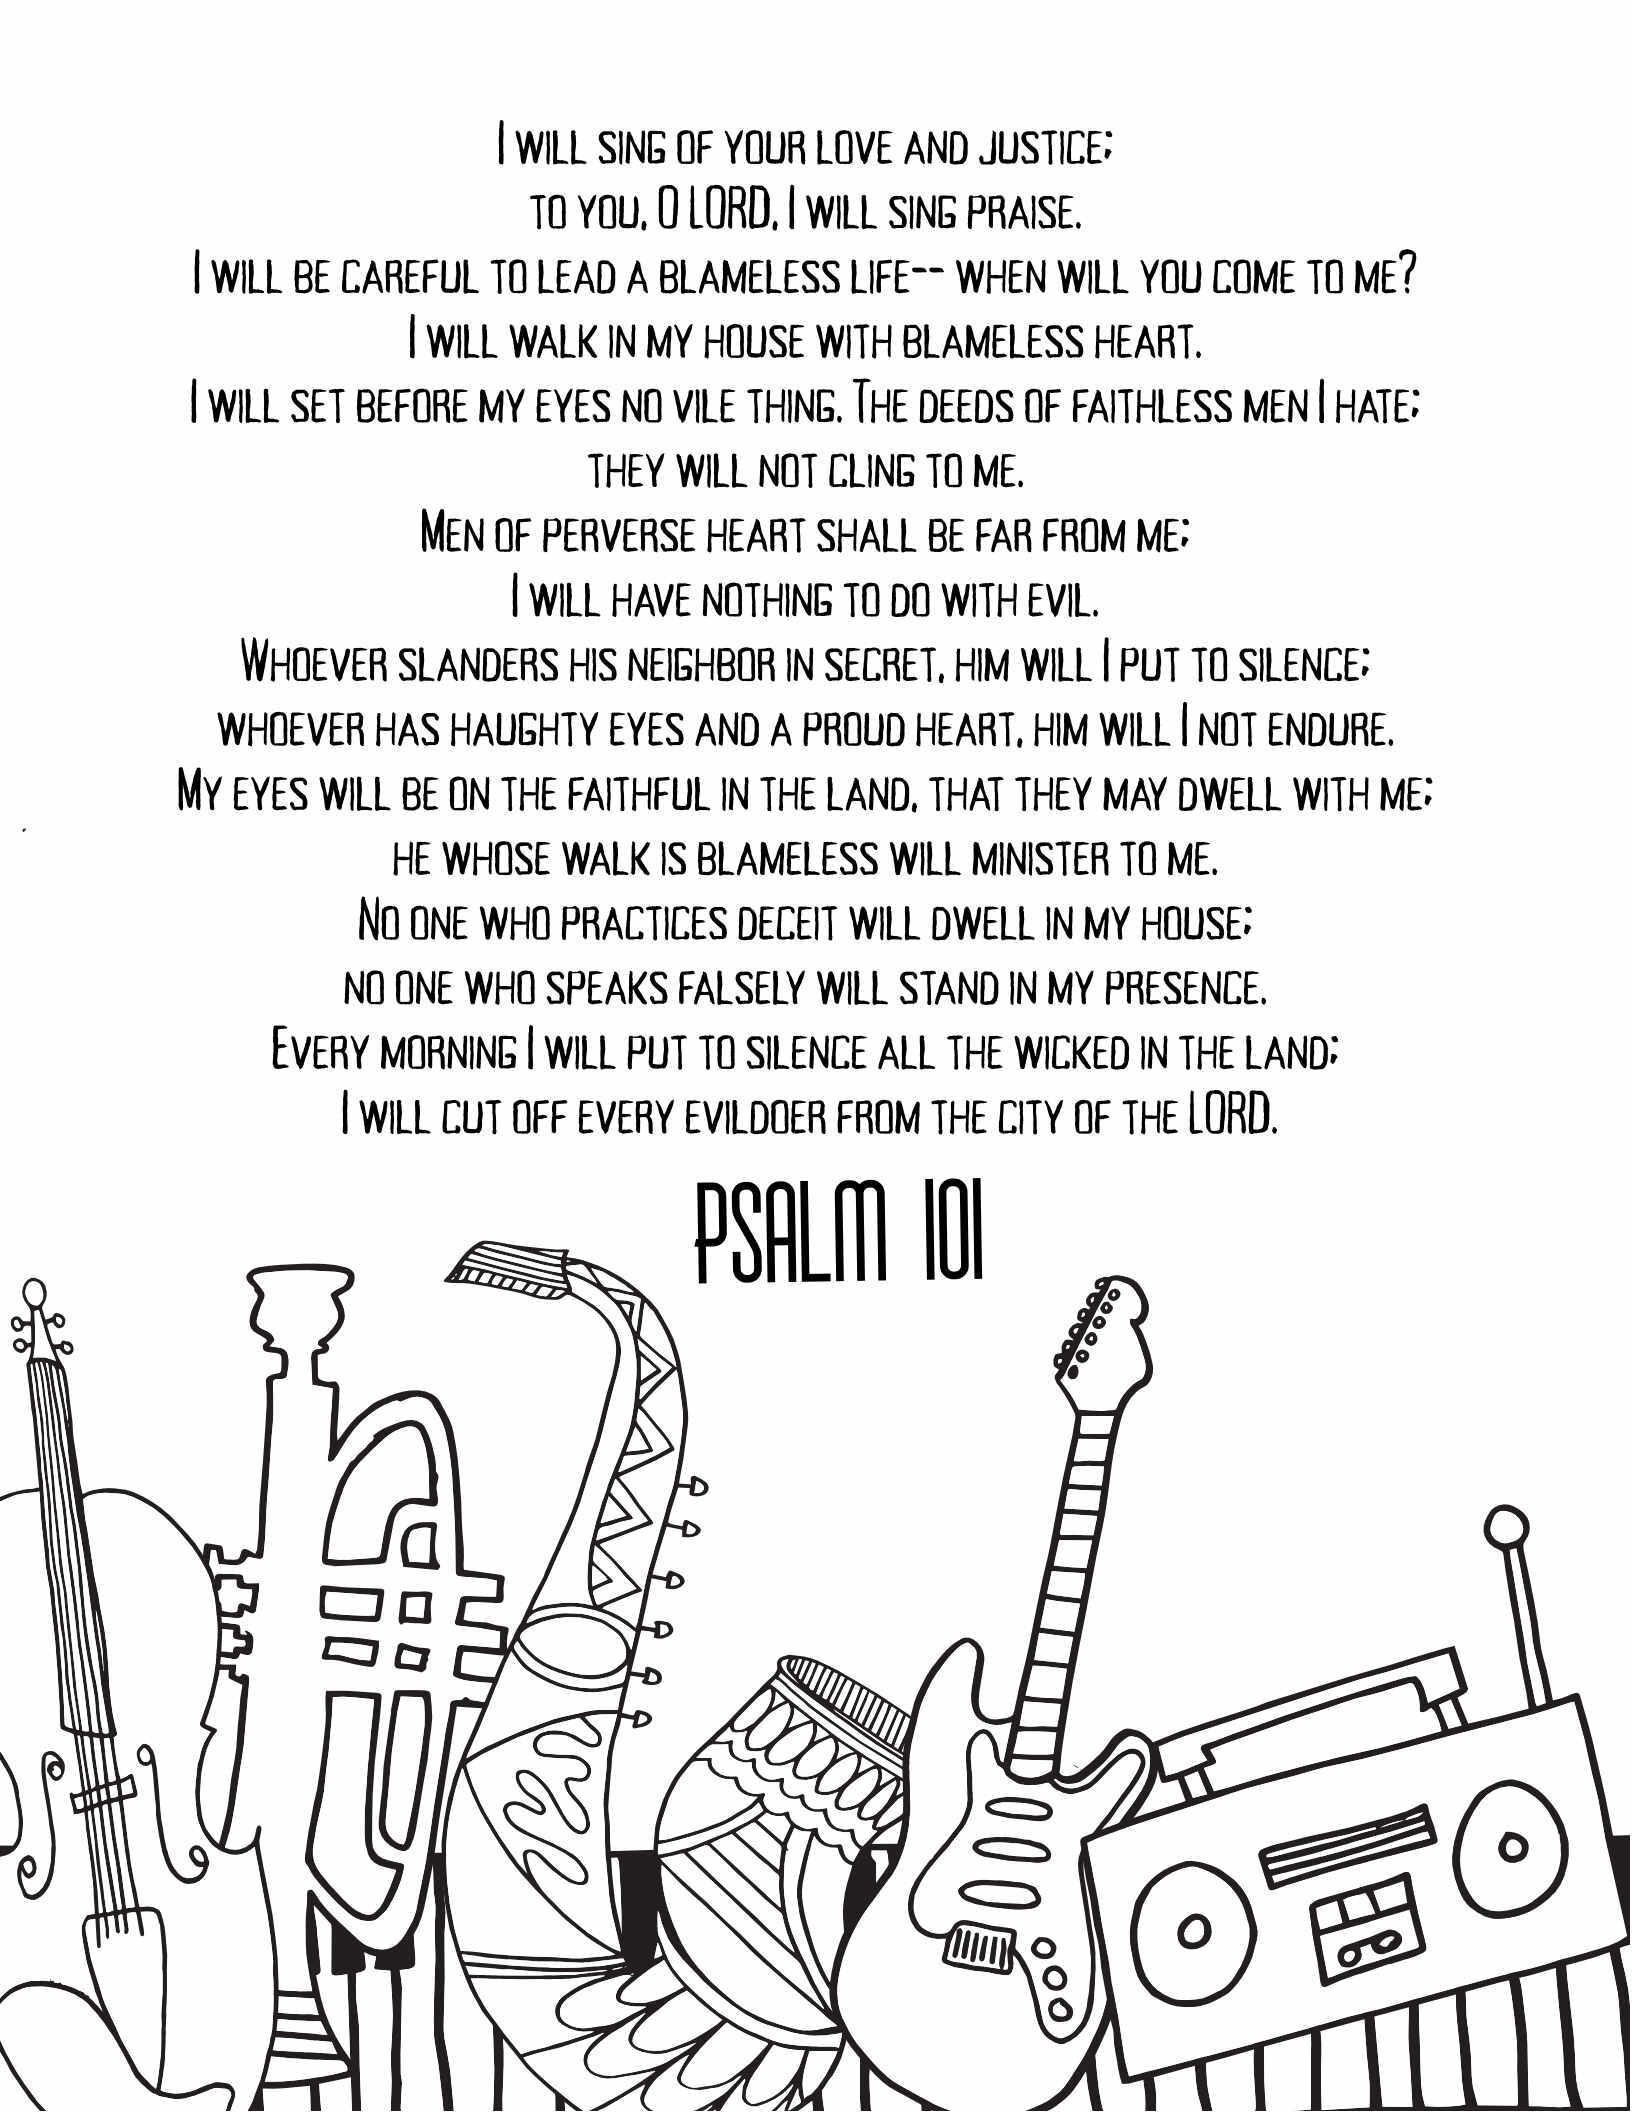 10 Free Printable Psalm Coloring Pages - Download and Color Adult Scripture - Psalm 101CLICK HERE TO DOWNLOAD THIS PAGE FREE